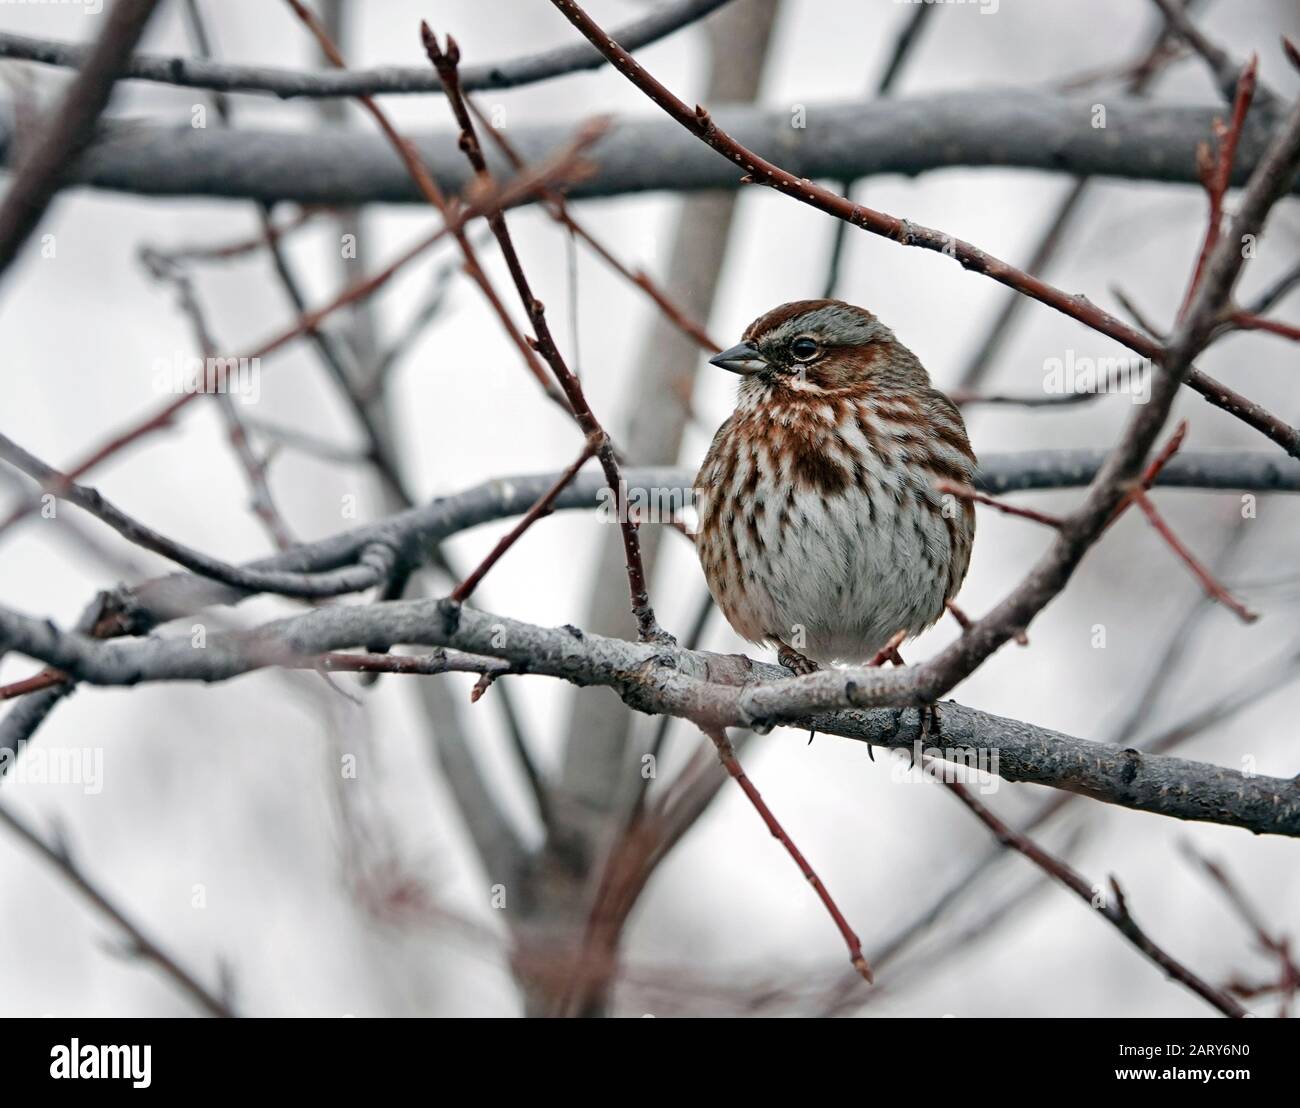 Portrait of a Song sparrow, Melospiza melodia, a common member of the sparrow family. This one was photographed in central Oregon. Stock Photo